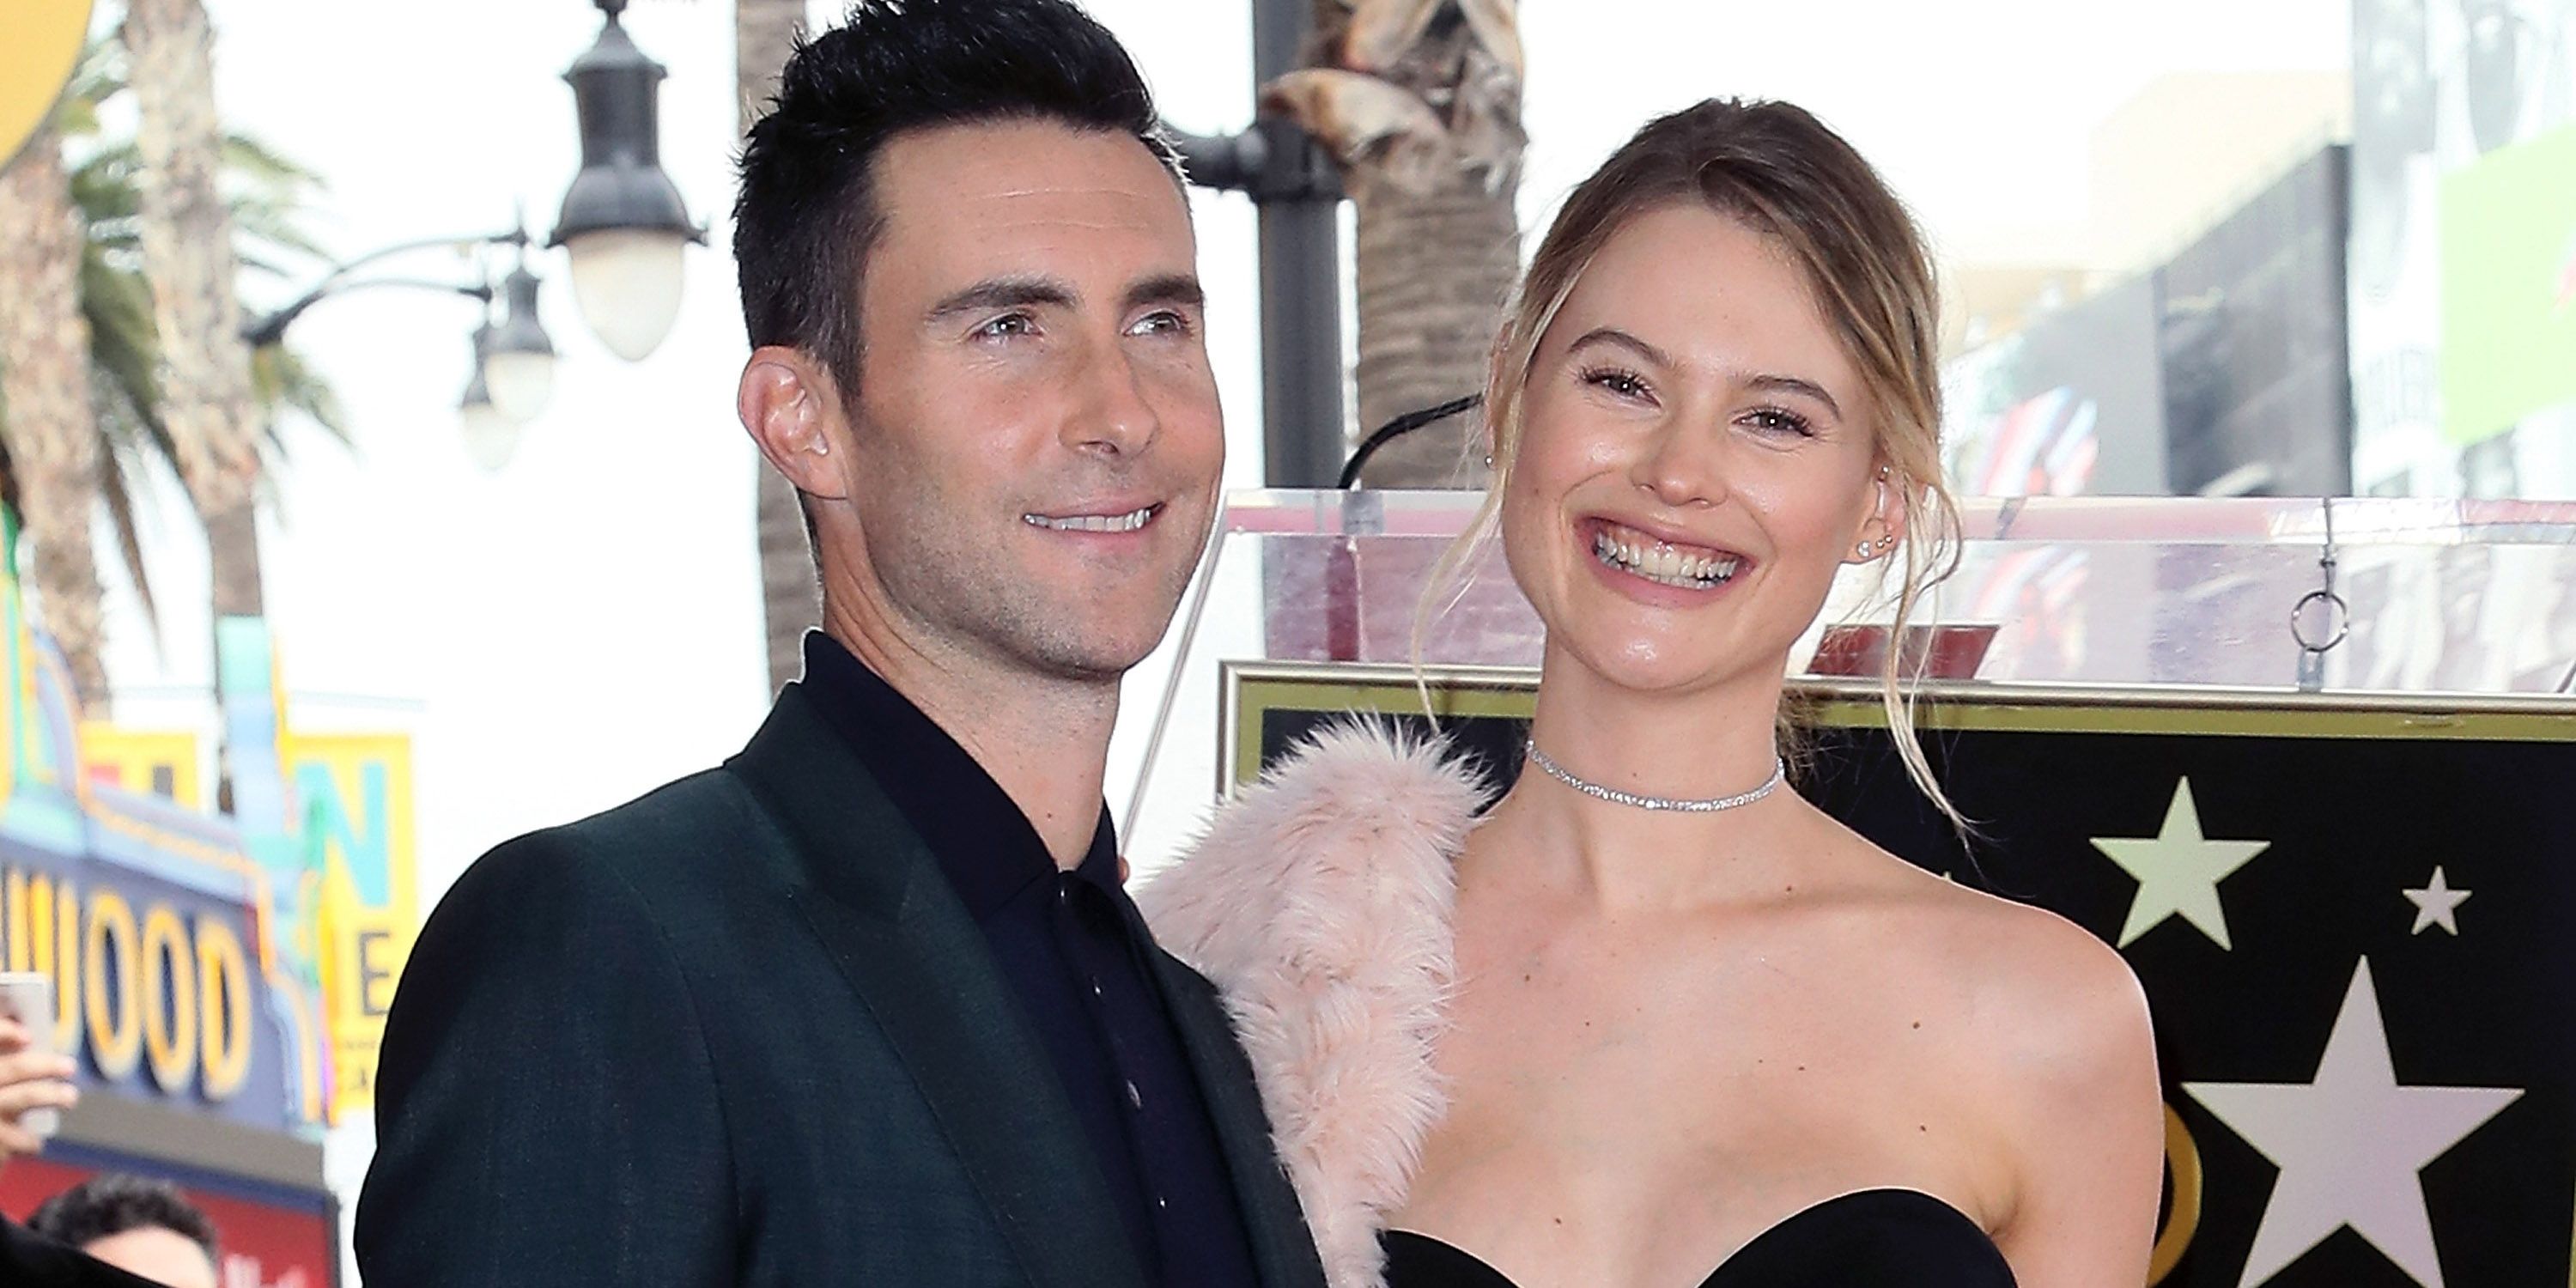 First Photo of Behati Prinsloo and Adam Levine's Second Child - Gio Grace  Levine